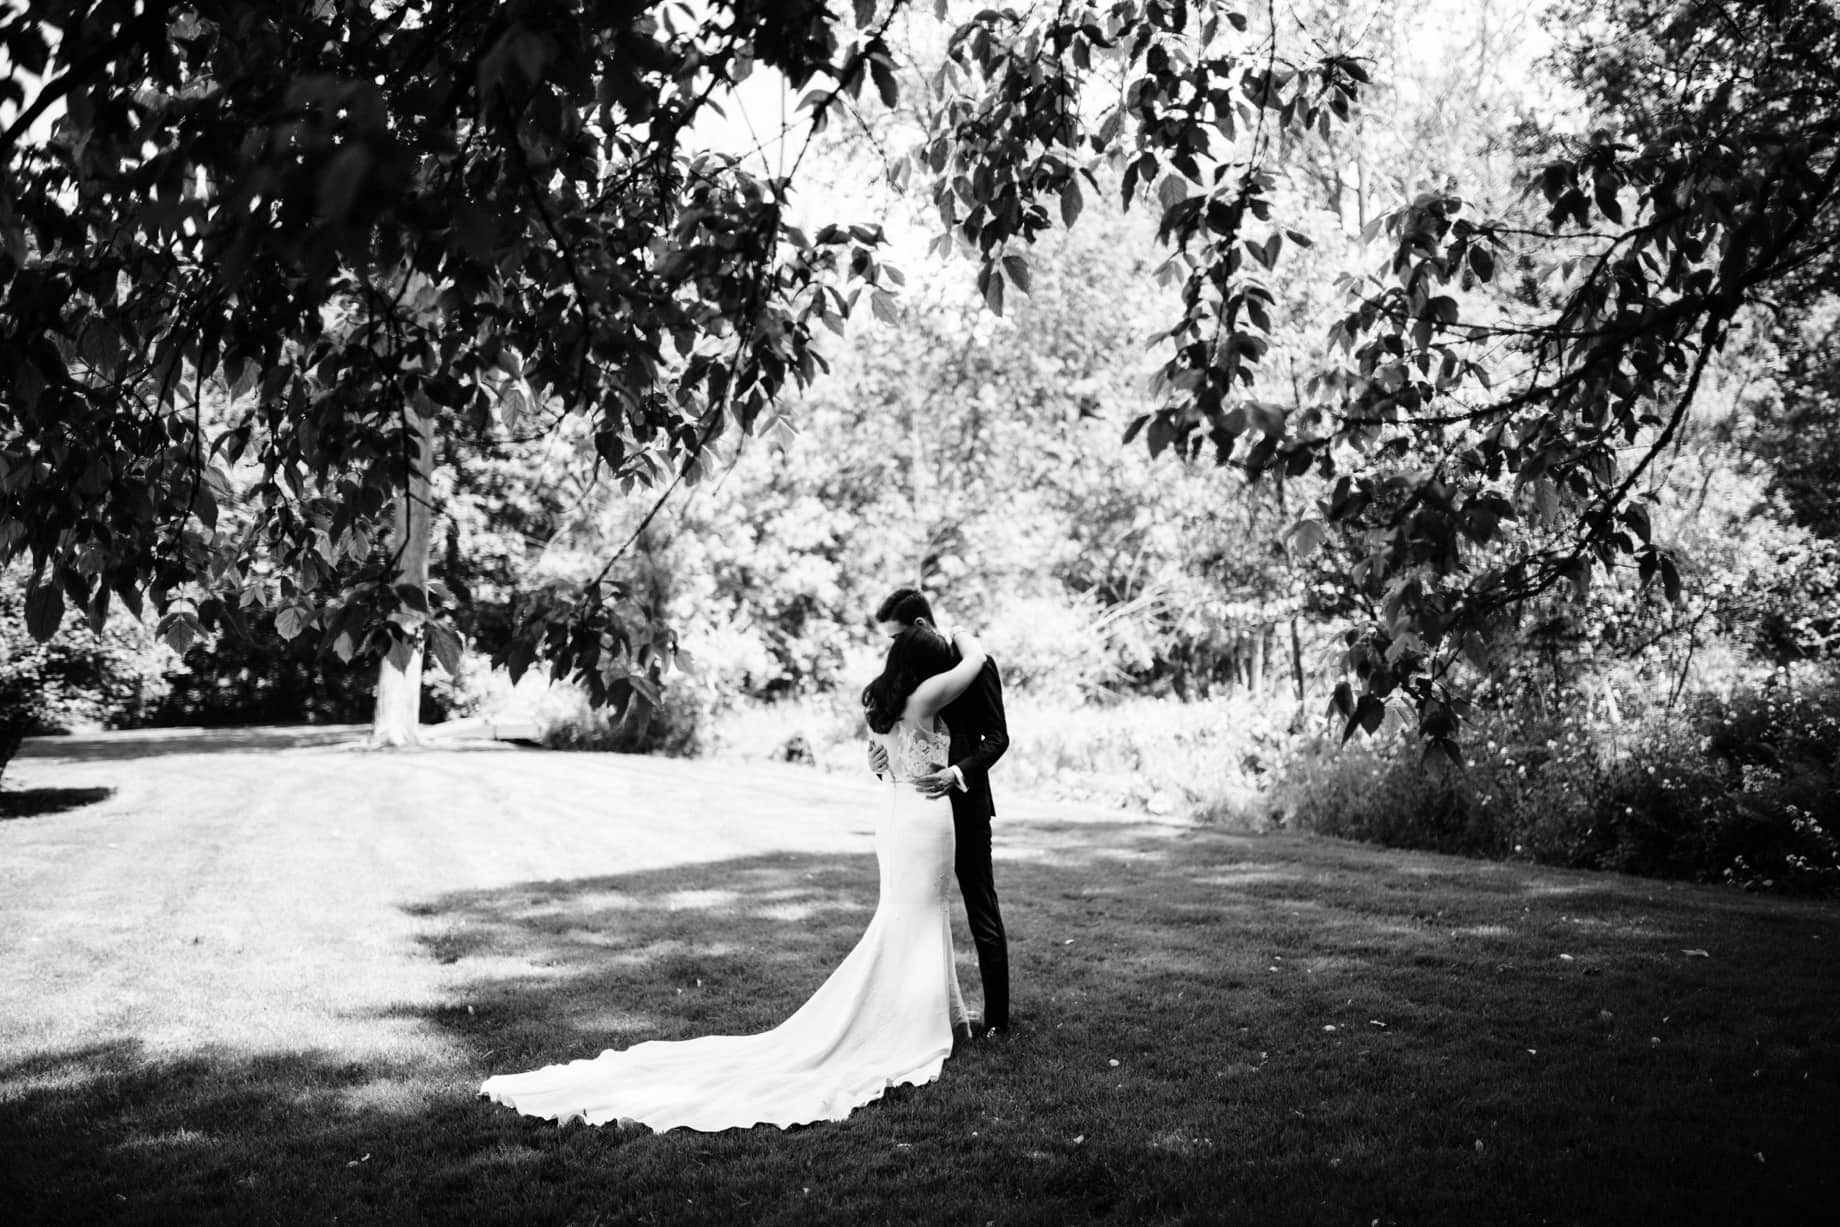 black and white portrait of a bride and groom embracing